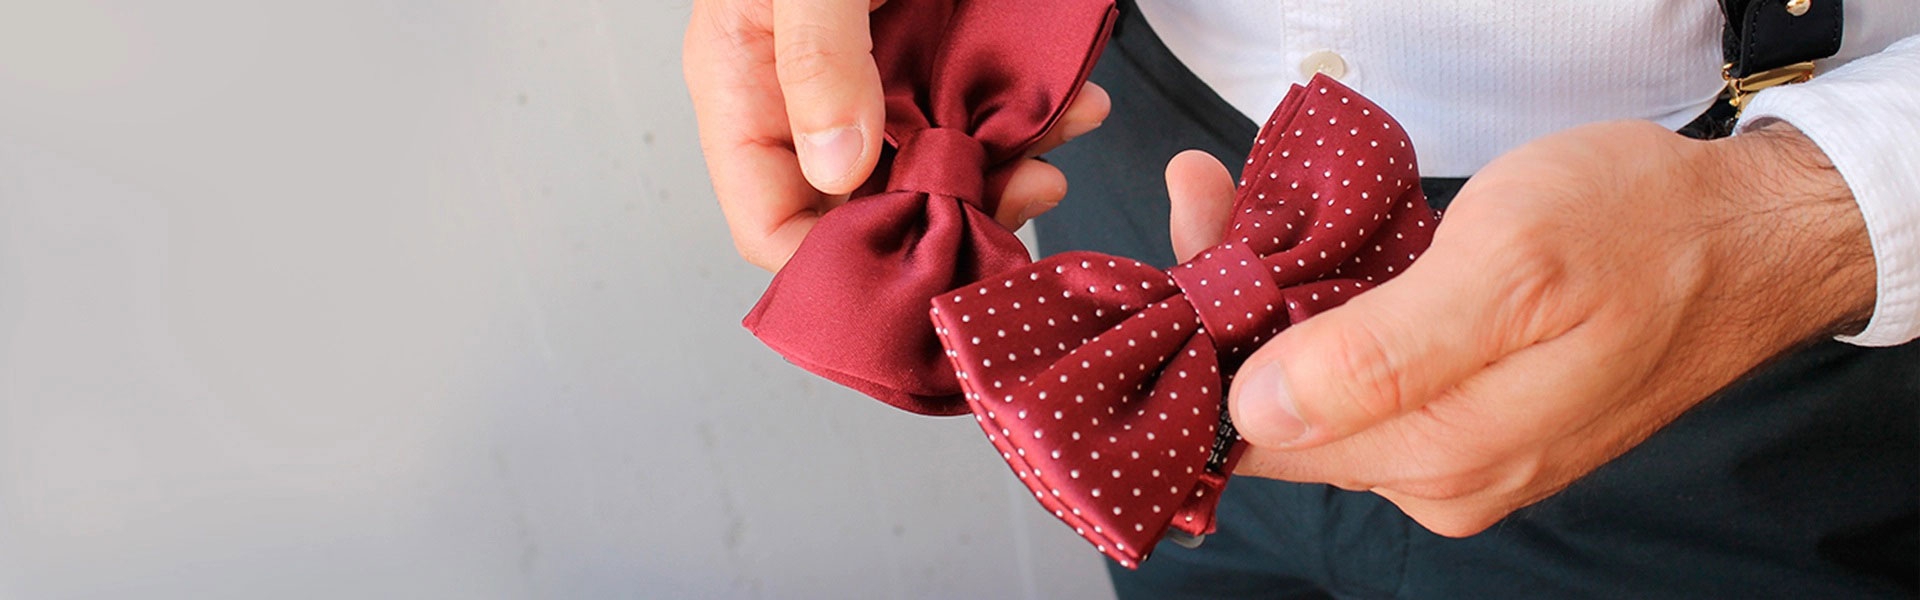 Handcrafted Silk Bow Ties by Brucle - Style and Quality Made in Italy